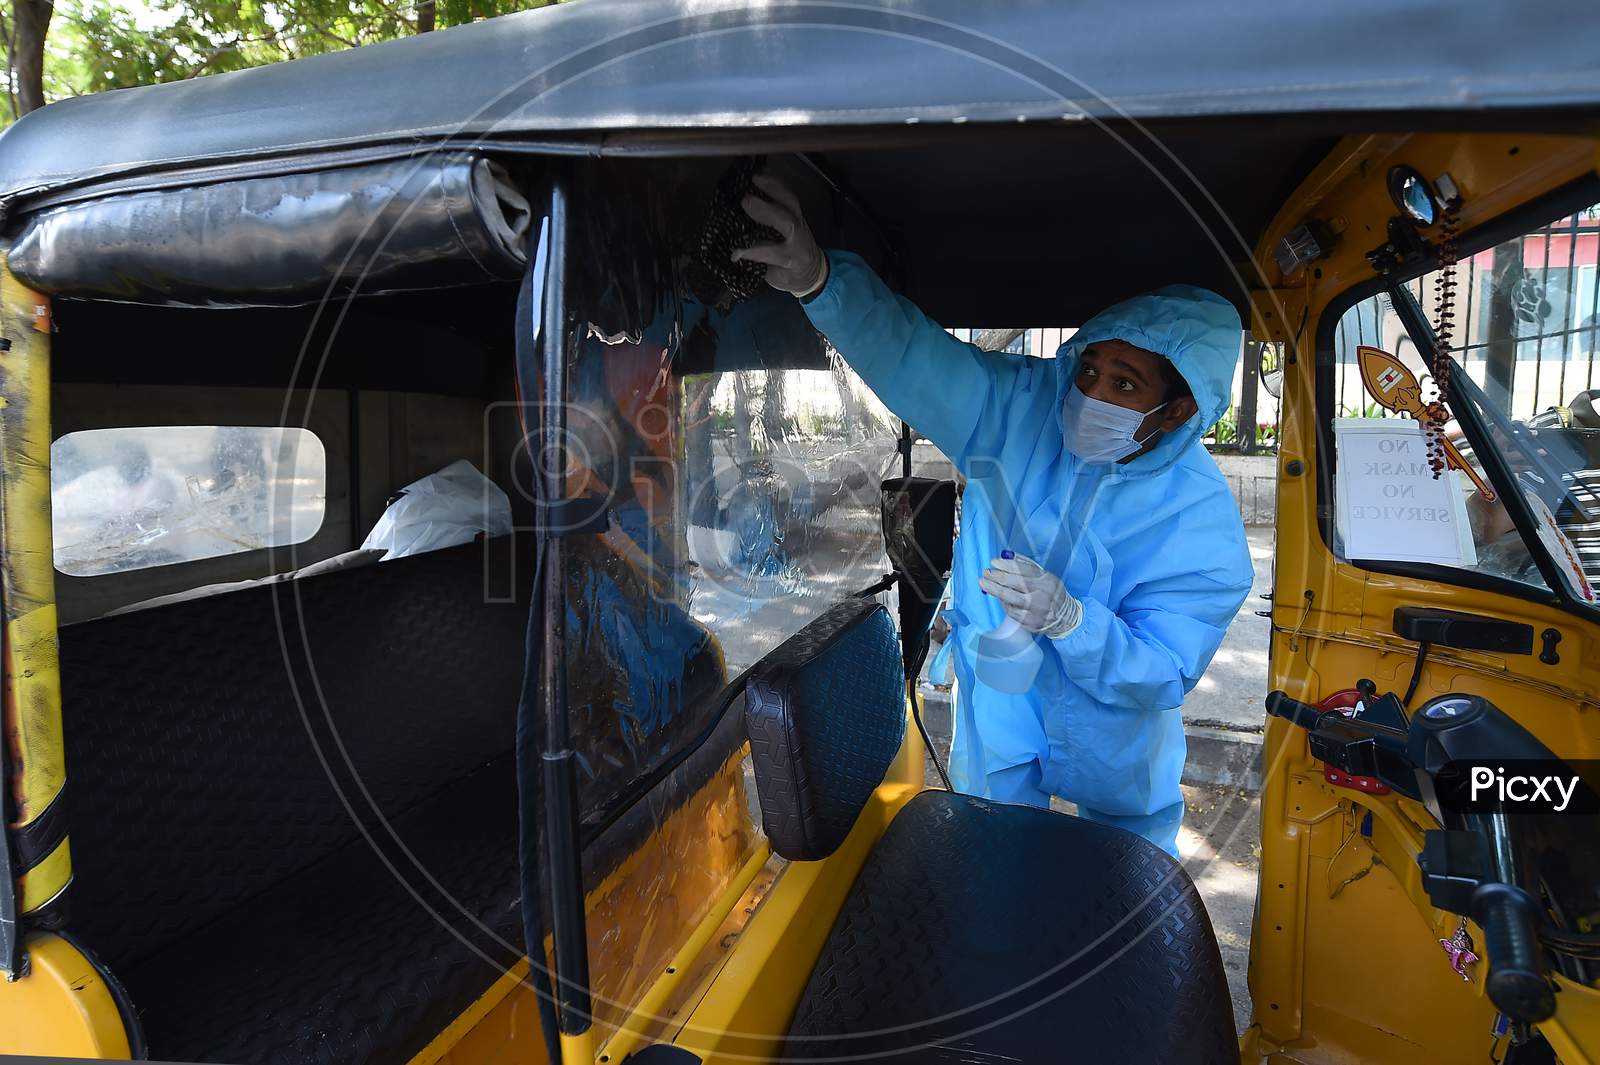 A Driver Wearing Personal Protective Equipment (Ppe) Disinfects His Auto Rickshaw in Chennai, Tamil Nadu